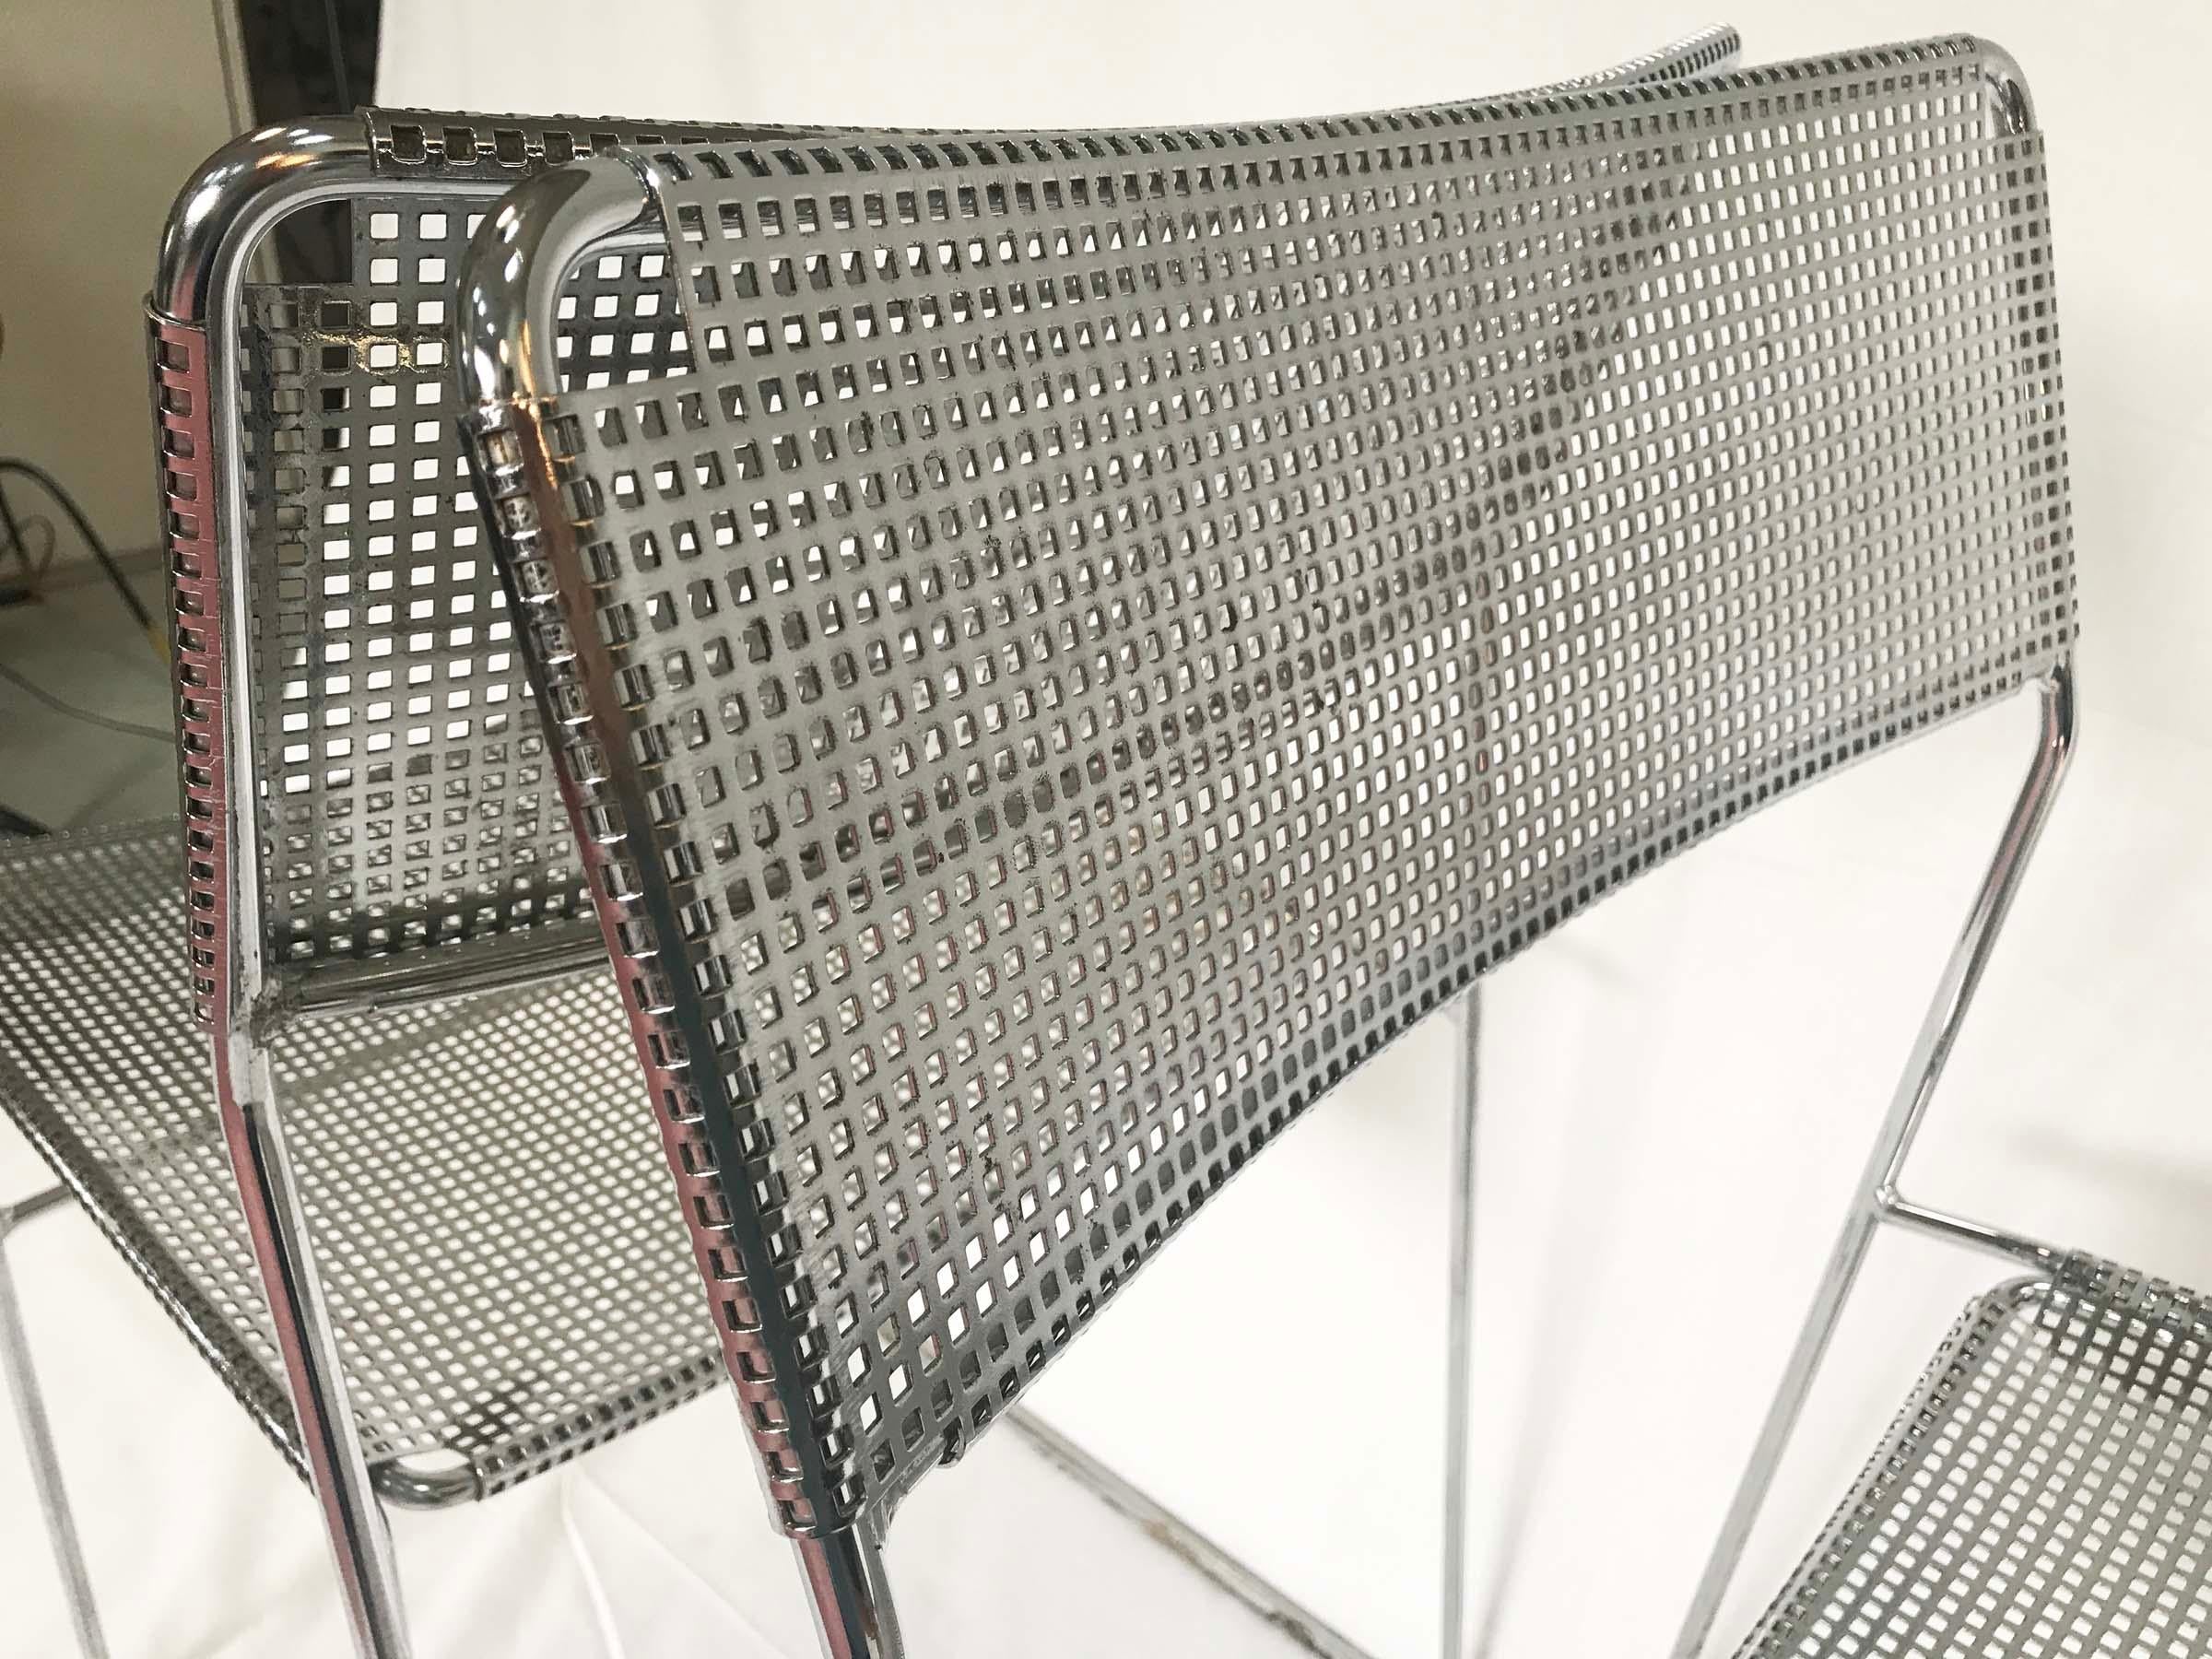 A pair of perforated chromed steel chairs designed by Niels Jorgen Haugesen in the 1970s and produced by Italian manufacturer Magis.